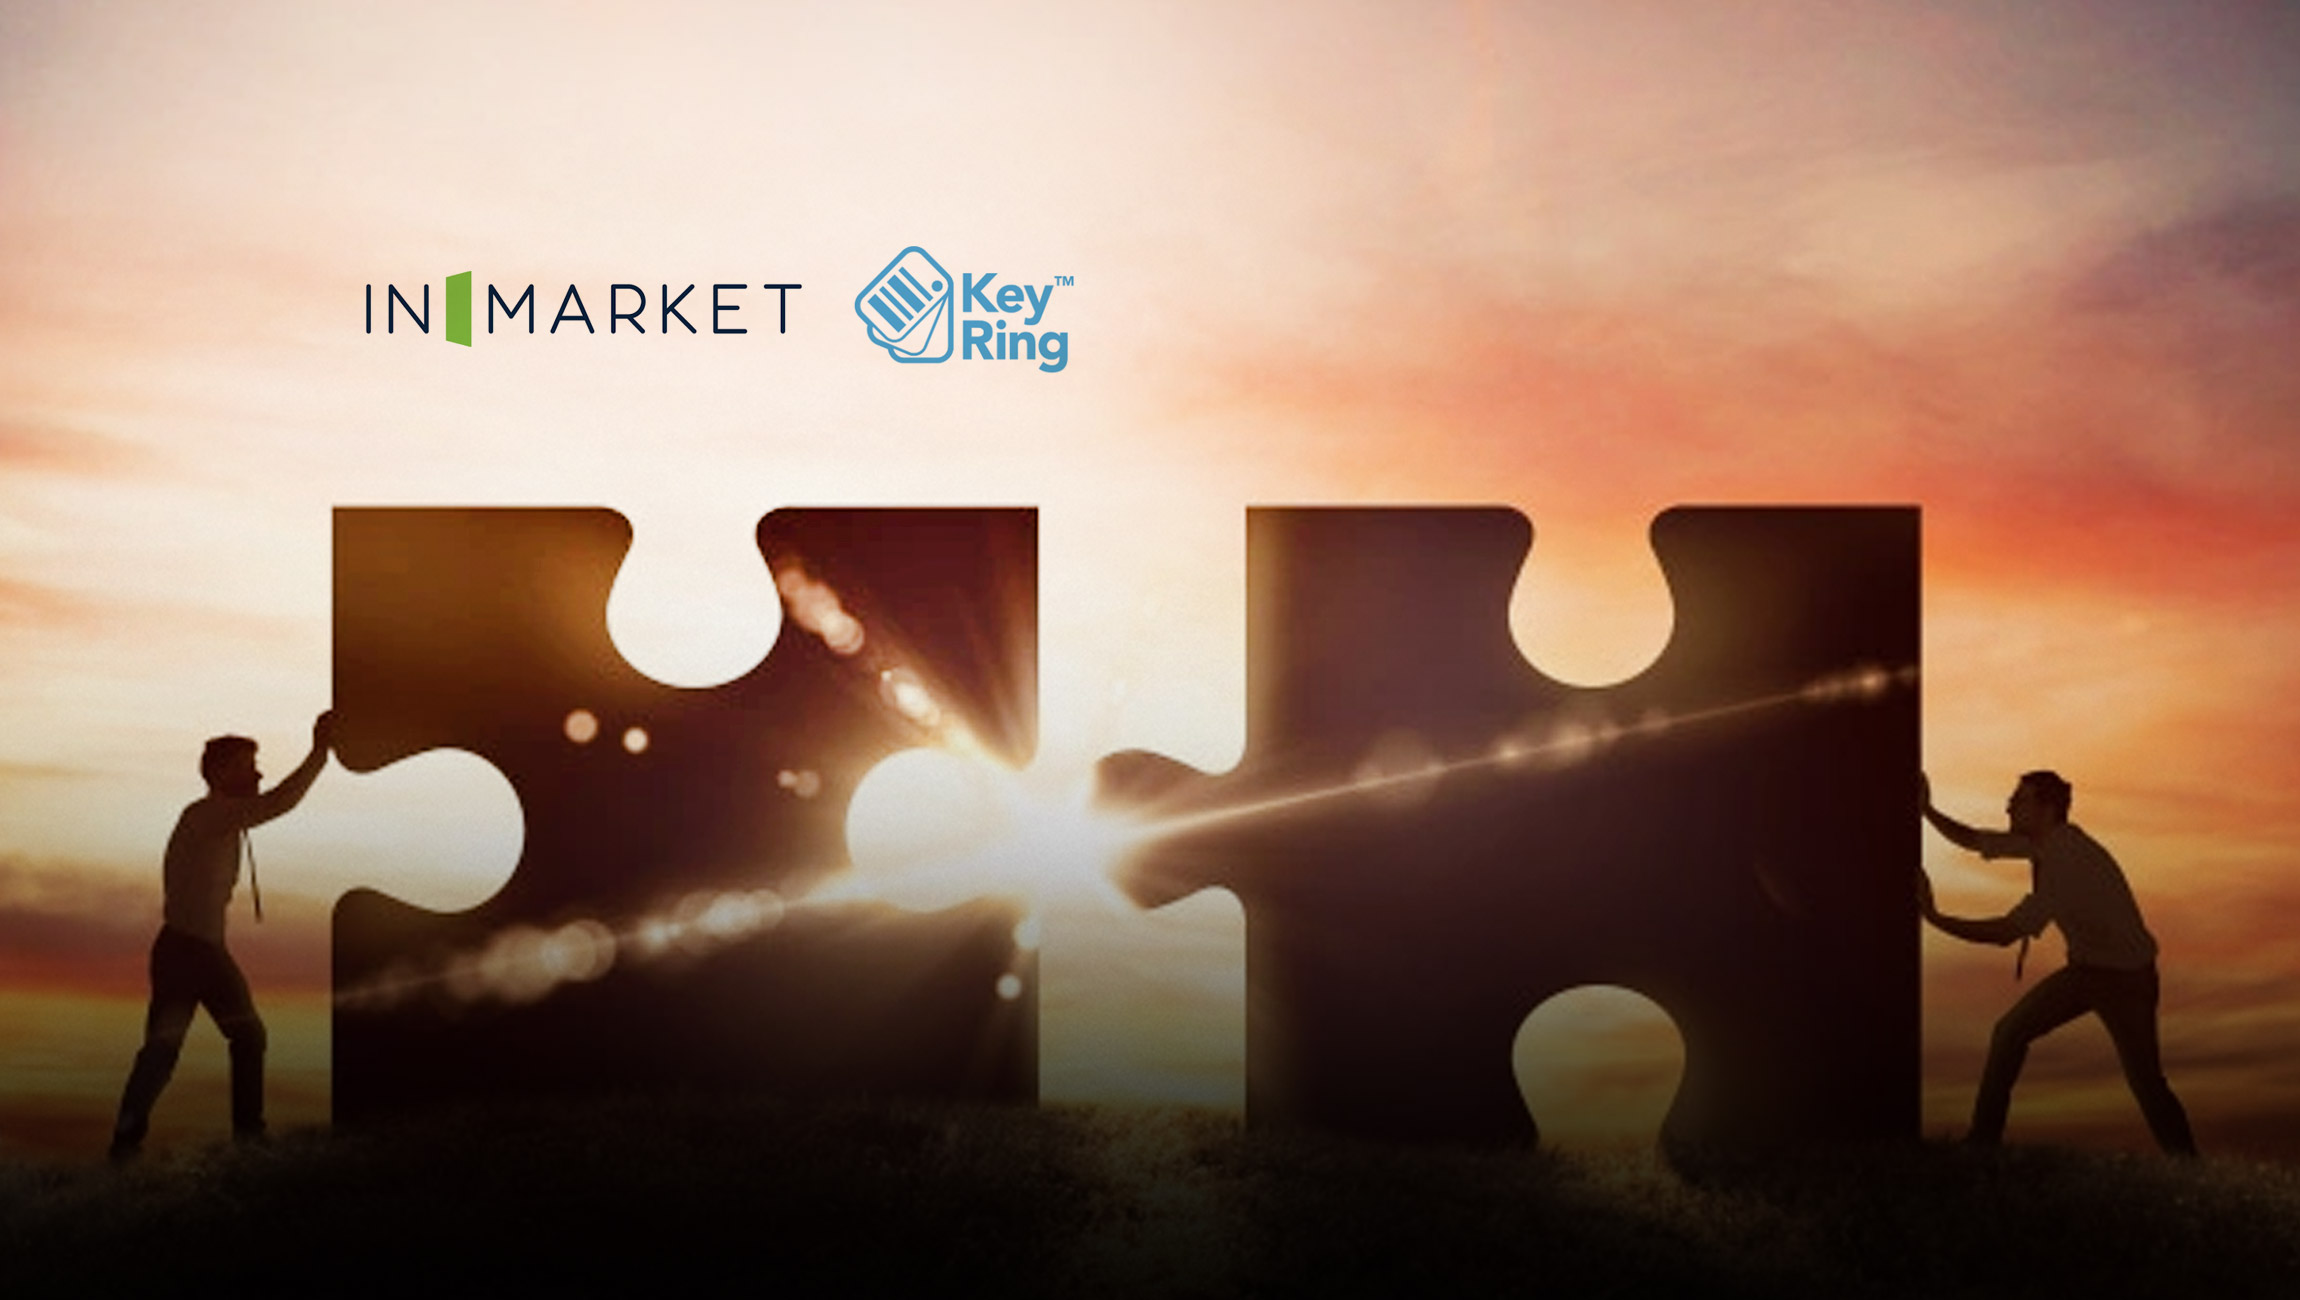 InMarket Acquires Key Ring, Expanding its Data-Driven Marketing and Insights Suite